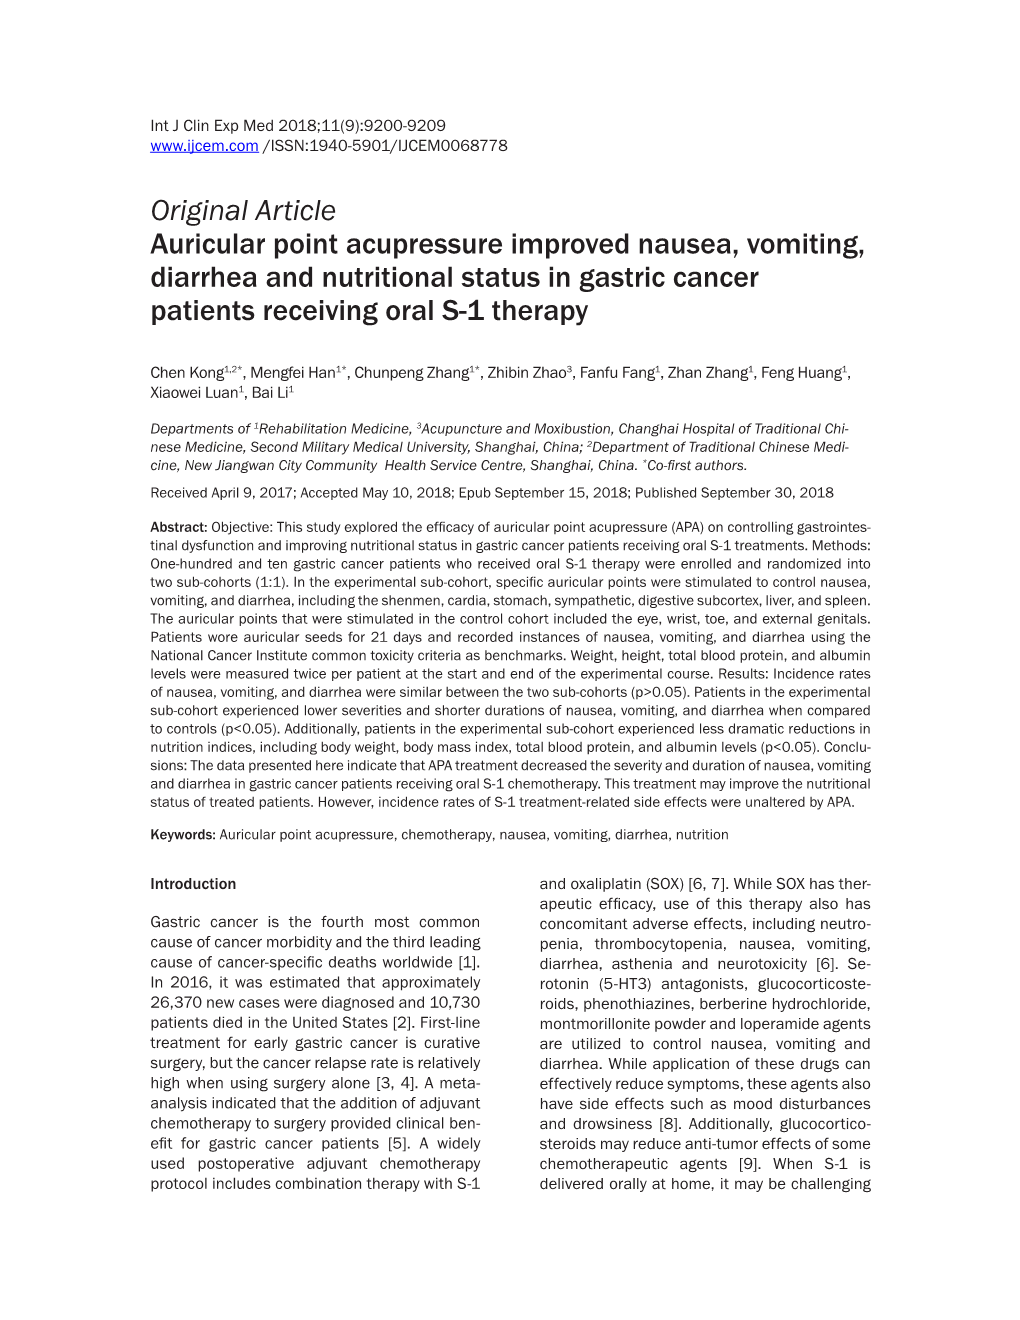 Original Article Auricular Point Acupressure Improved Nausea, Vomiting, Diarrhea and Nutritional Status in Gastric Cancer Patients Receiving Oral S-1 Therapy